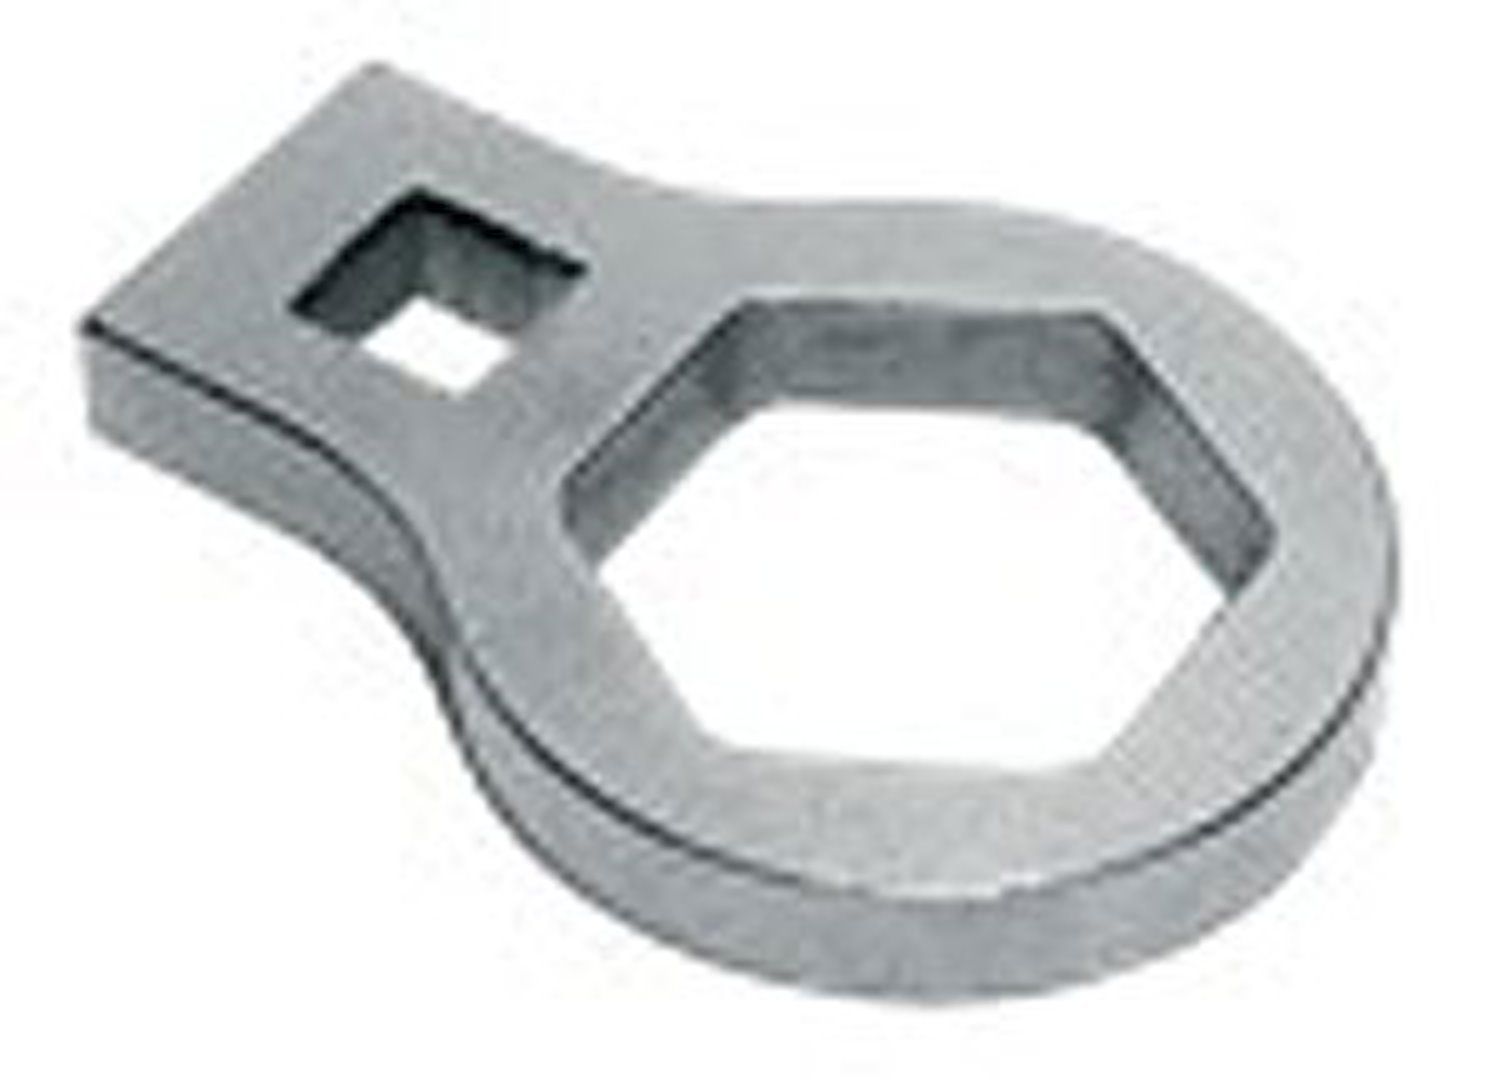 Pin Joint Wrench 2 3/8" Flat Hex